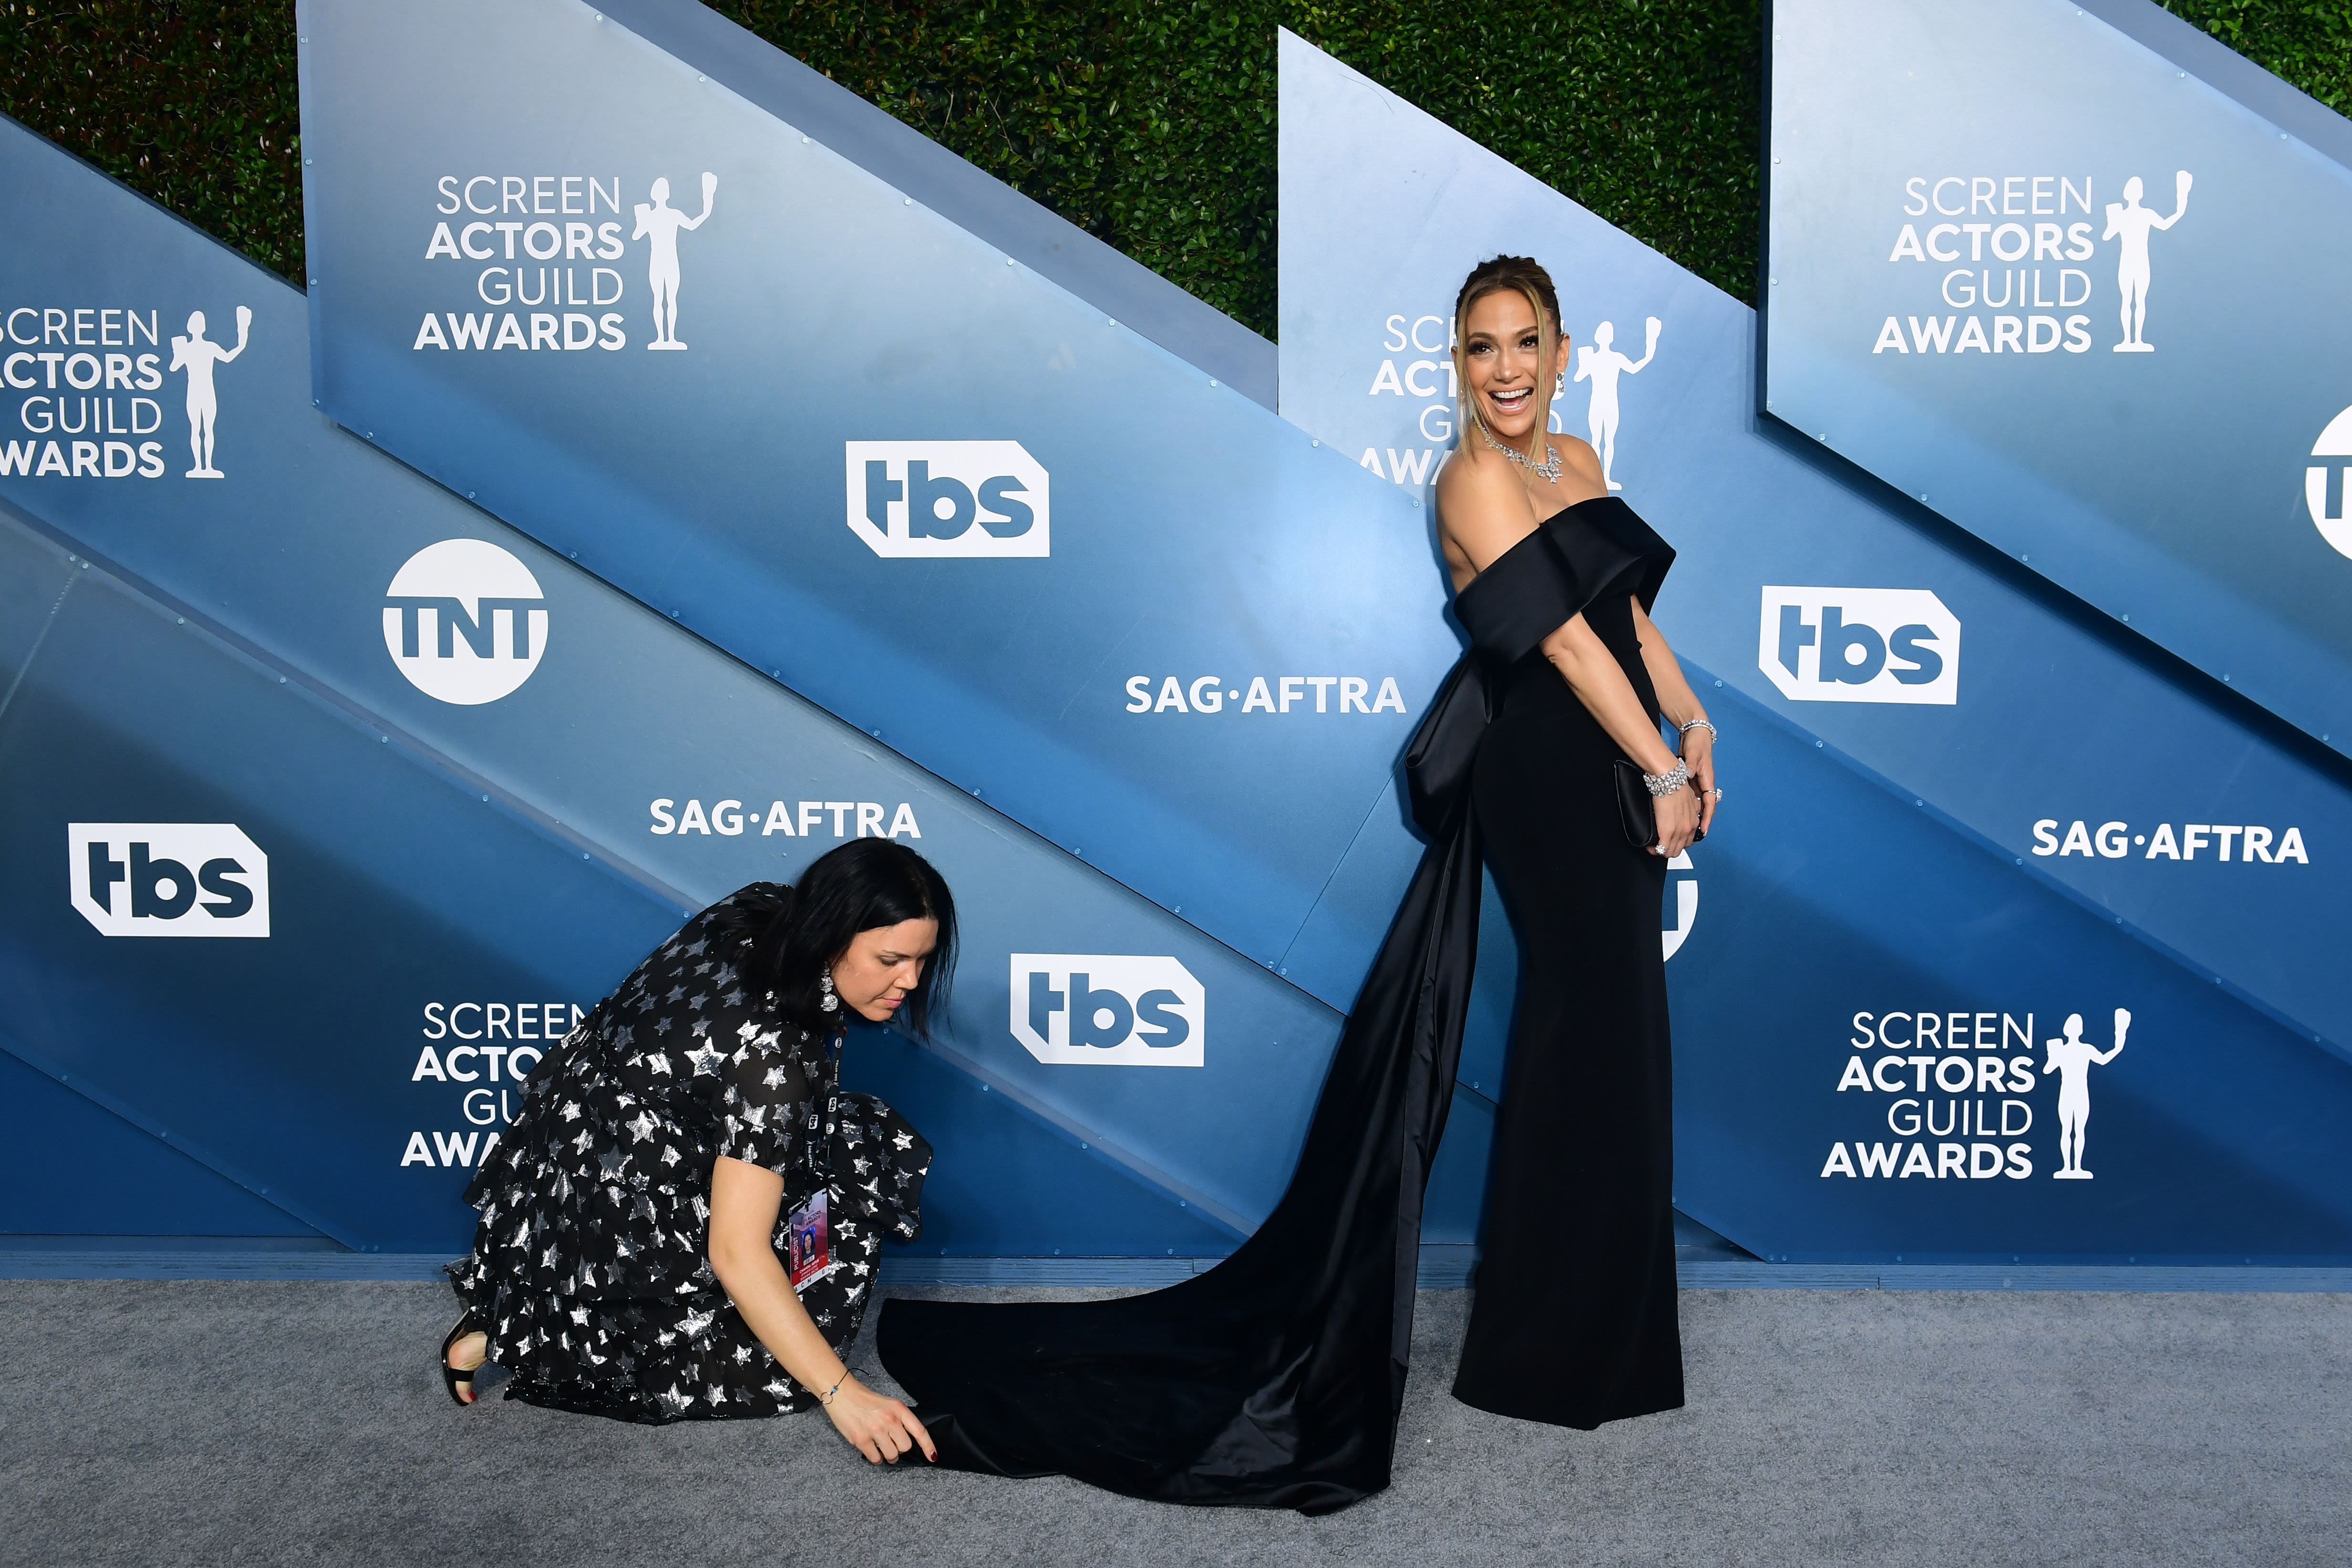 Screen Actor Guilds Awards 2020: Here are some of the best red carpet looks  from SAG Awards 2020